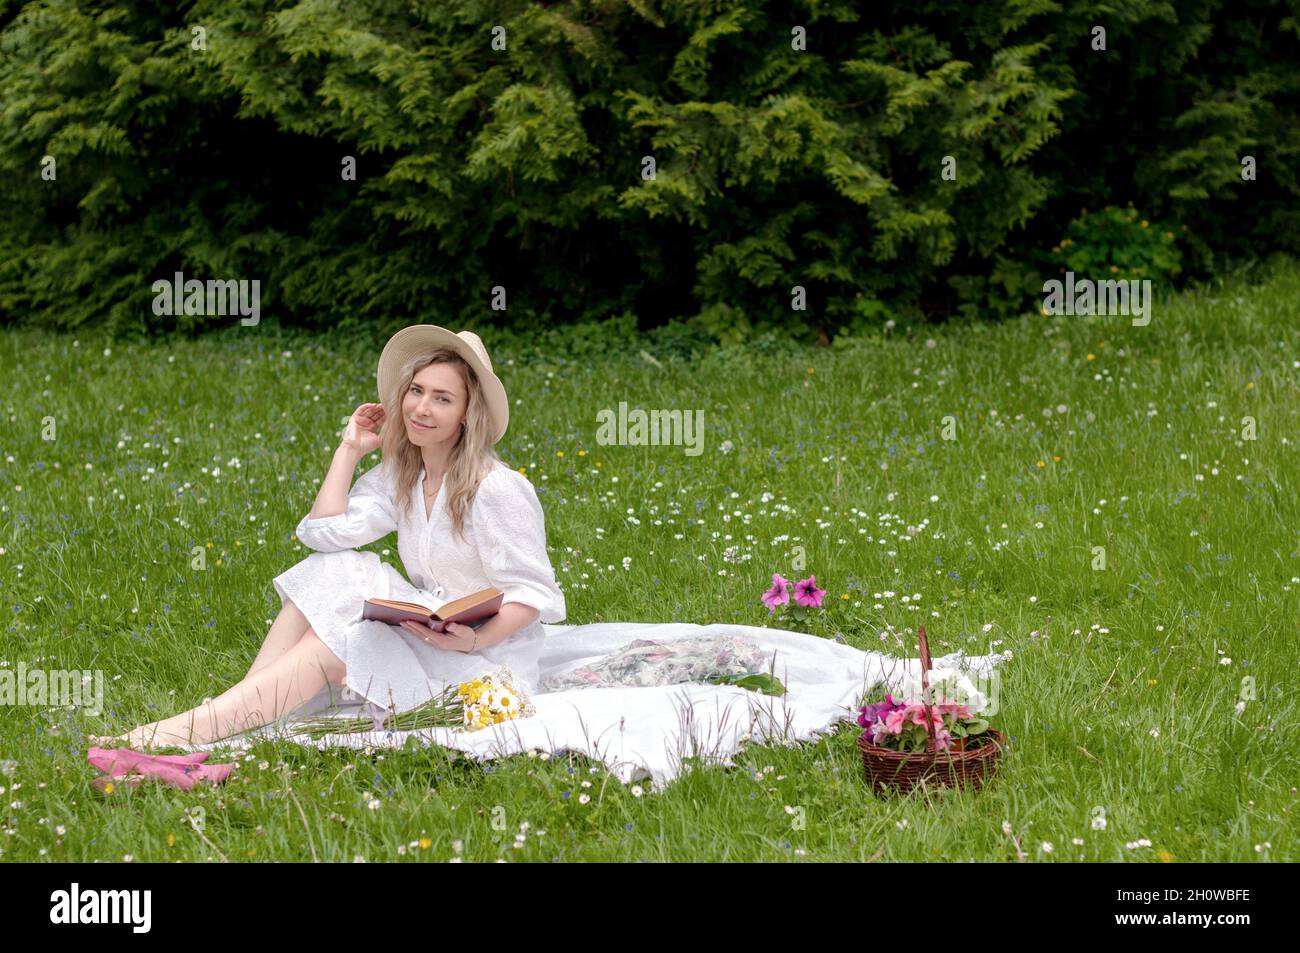 A smiling girl with a book on a blanket in the forest. Stock Photo